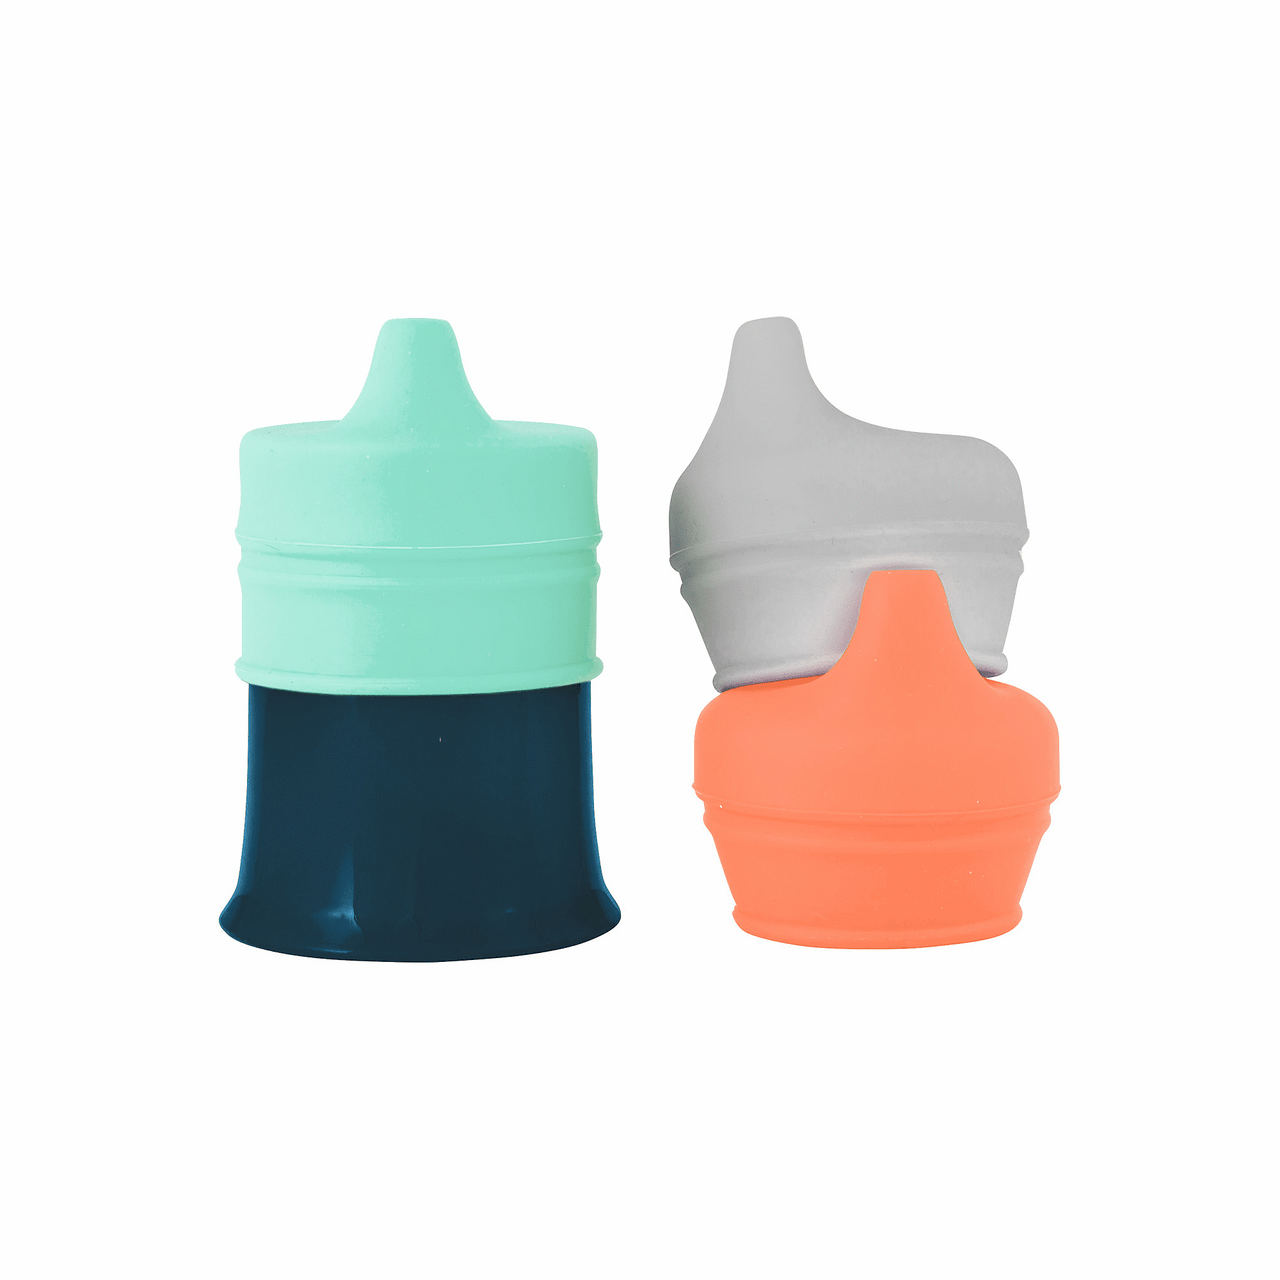  Boon Snug Silicone Sippy Cup Lids - Convert Any Kids Cups or  Toddler Cups into Soft Spout Sippy Cups - Toddler Feeding Supplies and  Travel Essentials - Green - 3 Count : Baby